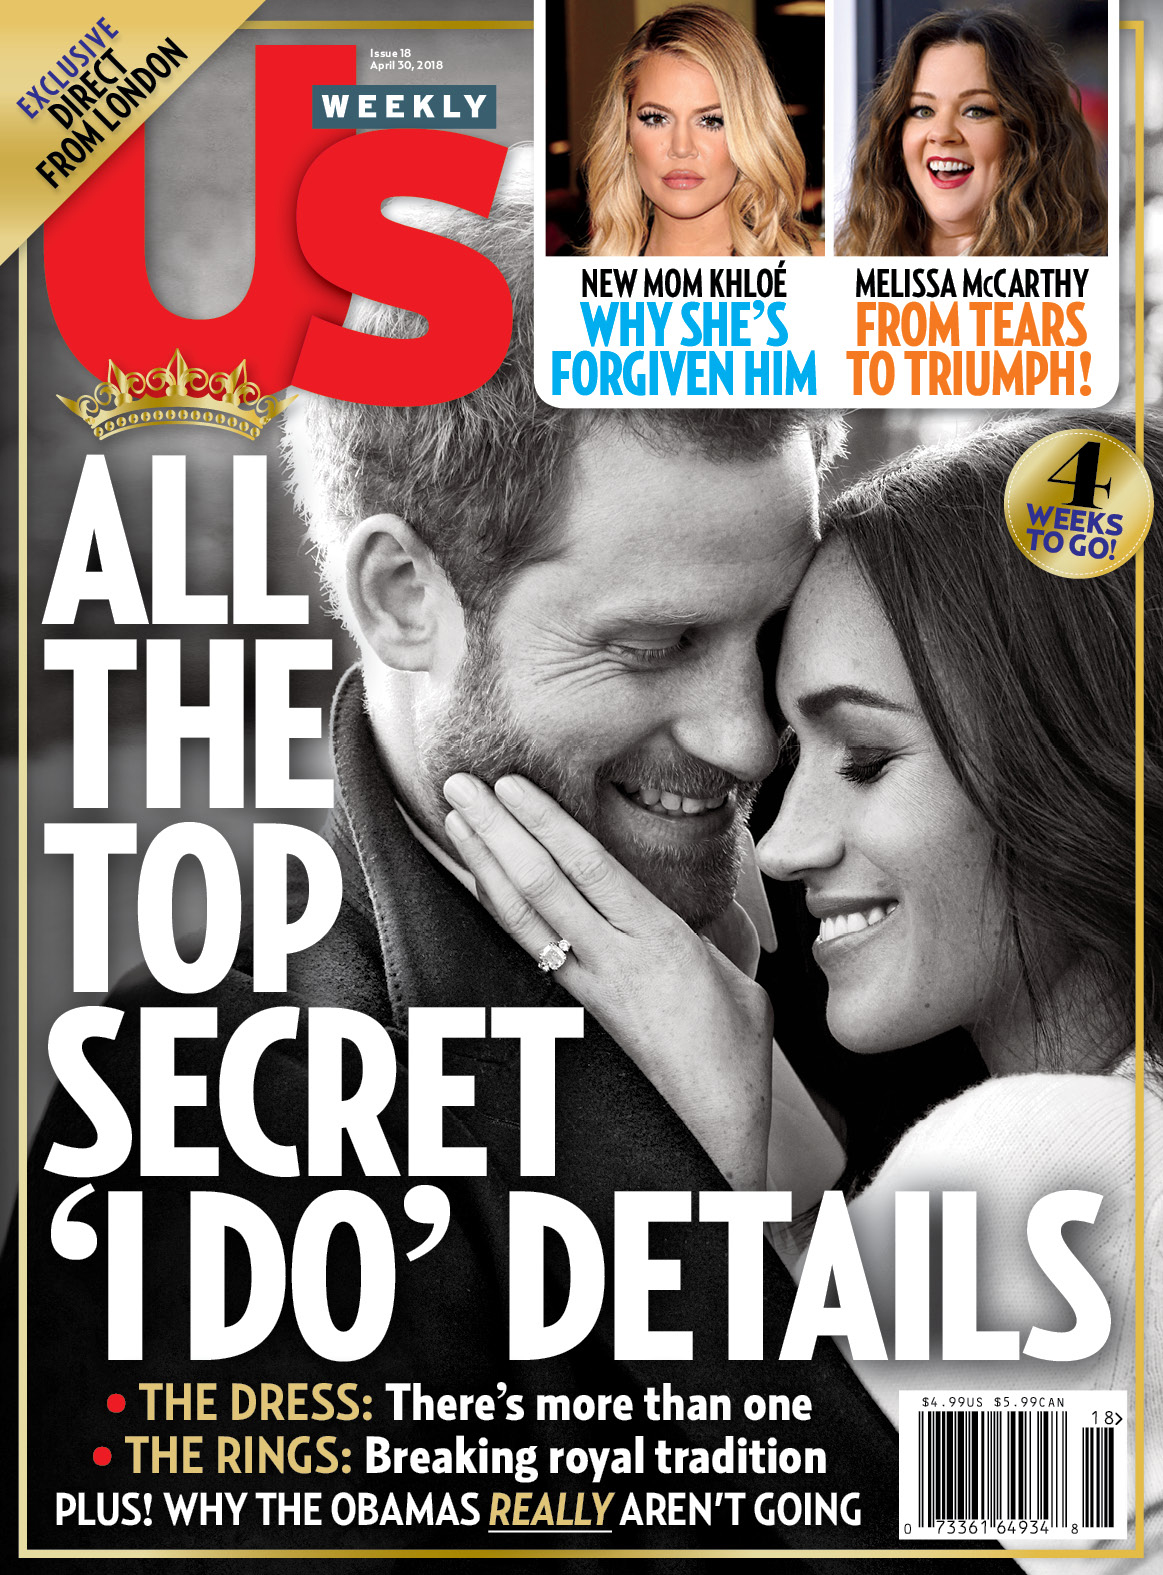 us-weekly-issue-18-meghan-prince-harry cover